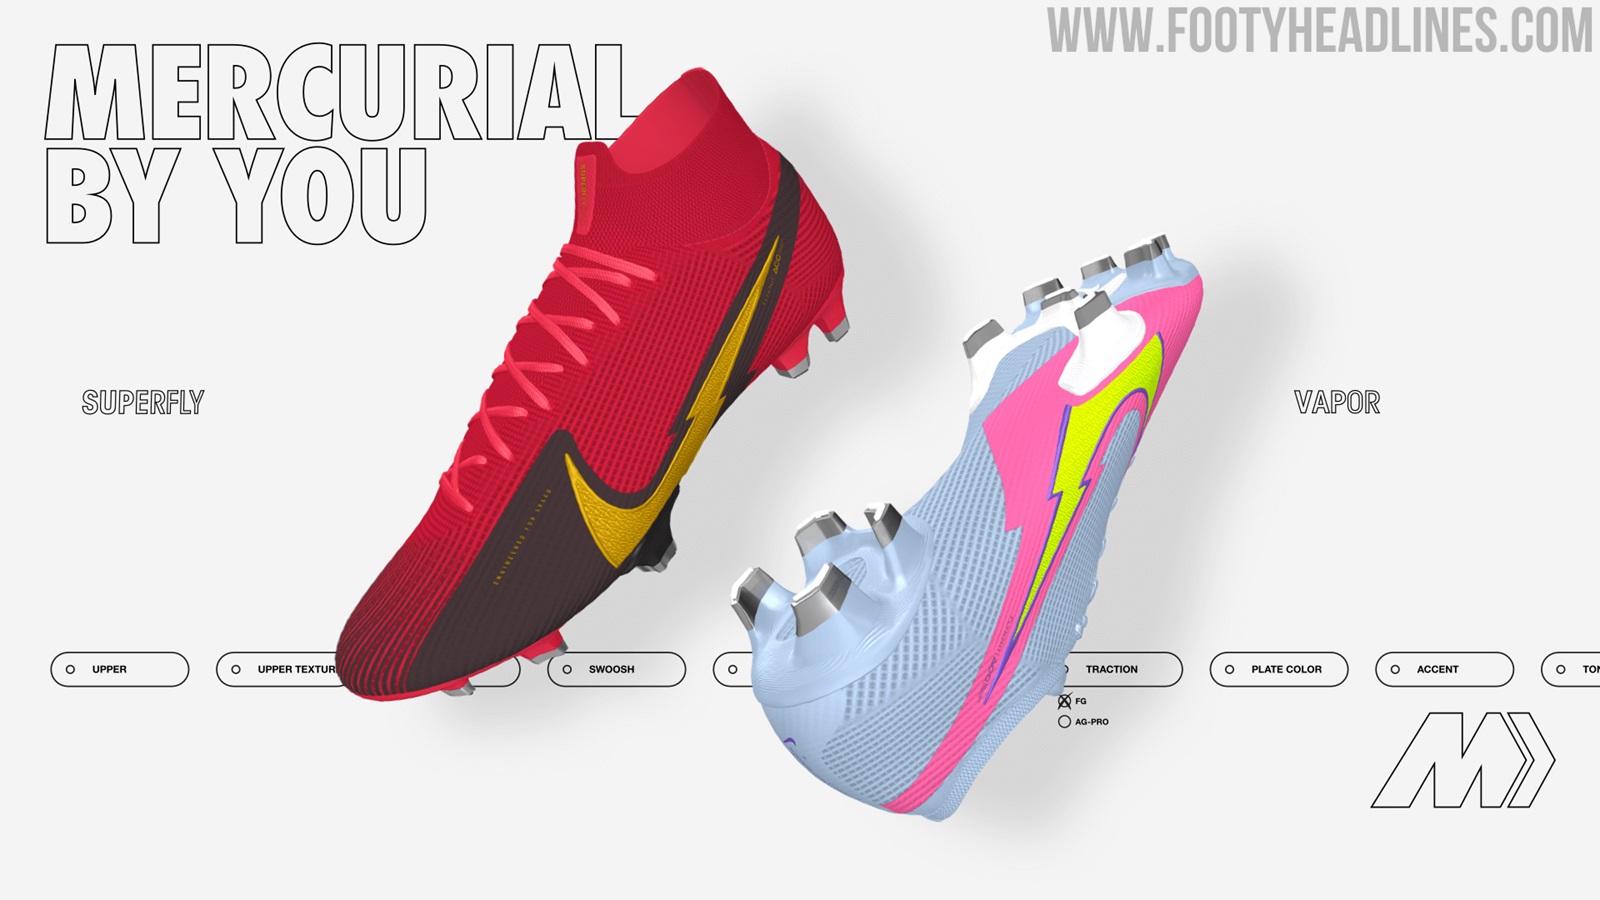 Humedad Extra Prescripción Spectacular Updated "Nike By You" Mercurial Superfly & Vapor Boots Released  - Footy Headlines